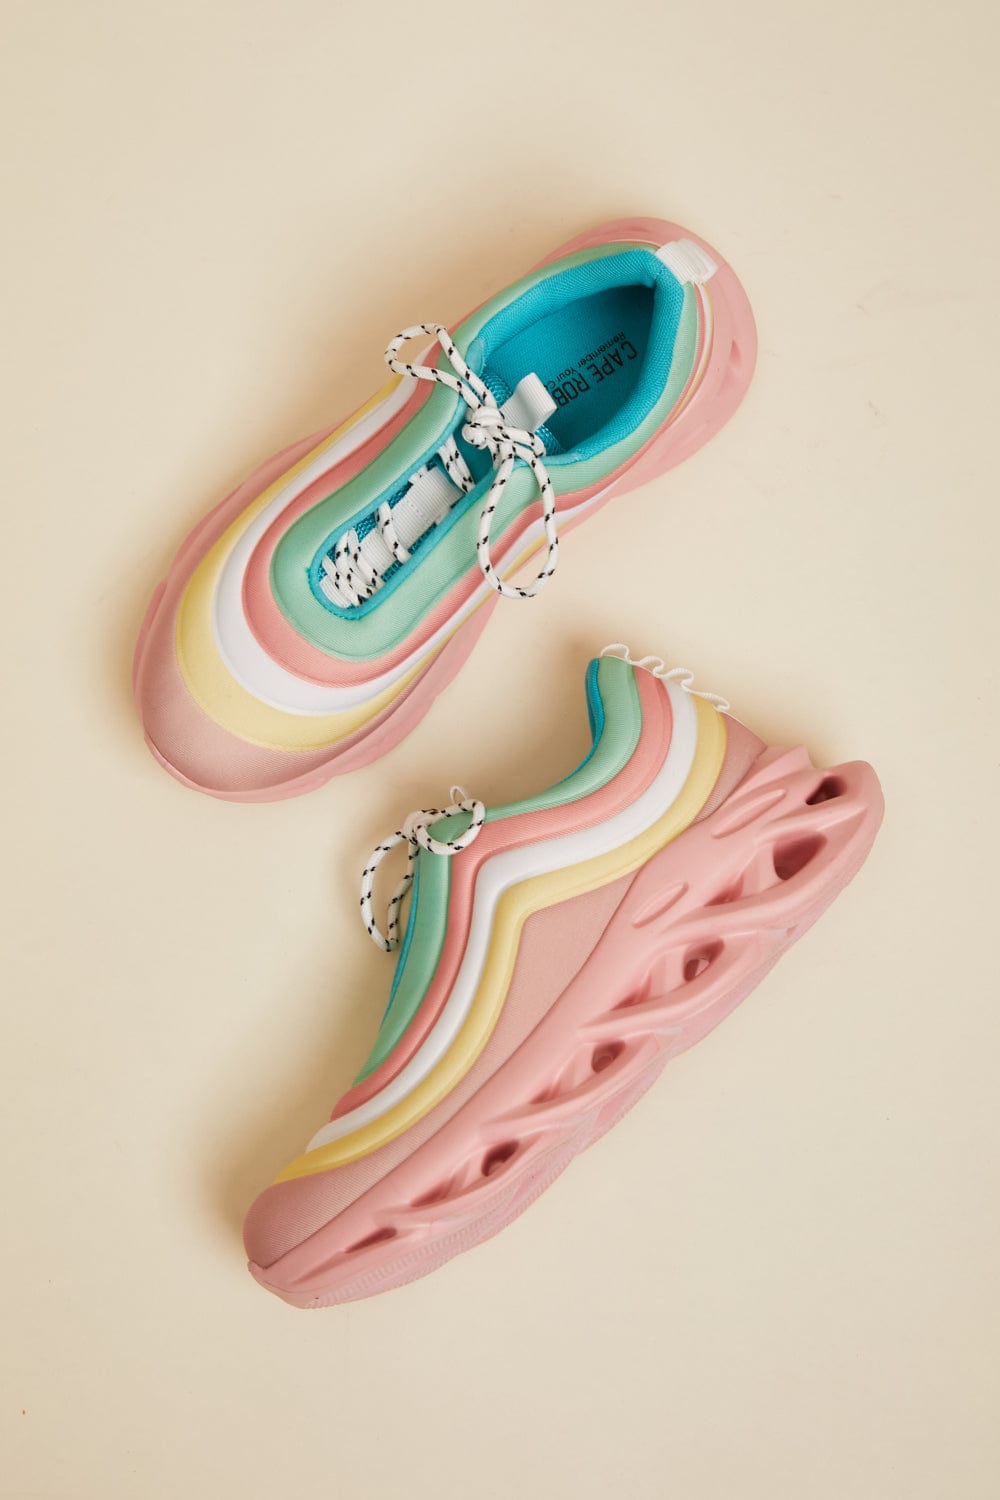 SAVLUXE Shoes Fun Times Multicolored Sneakers